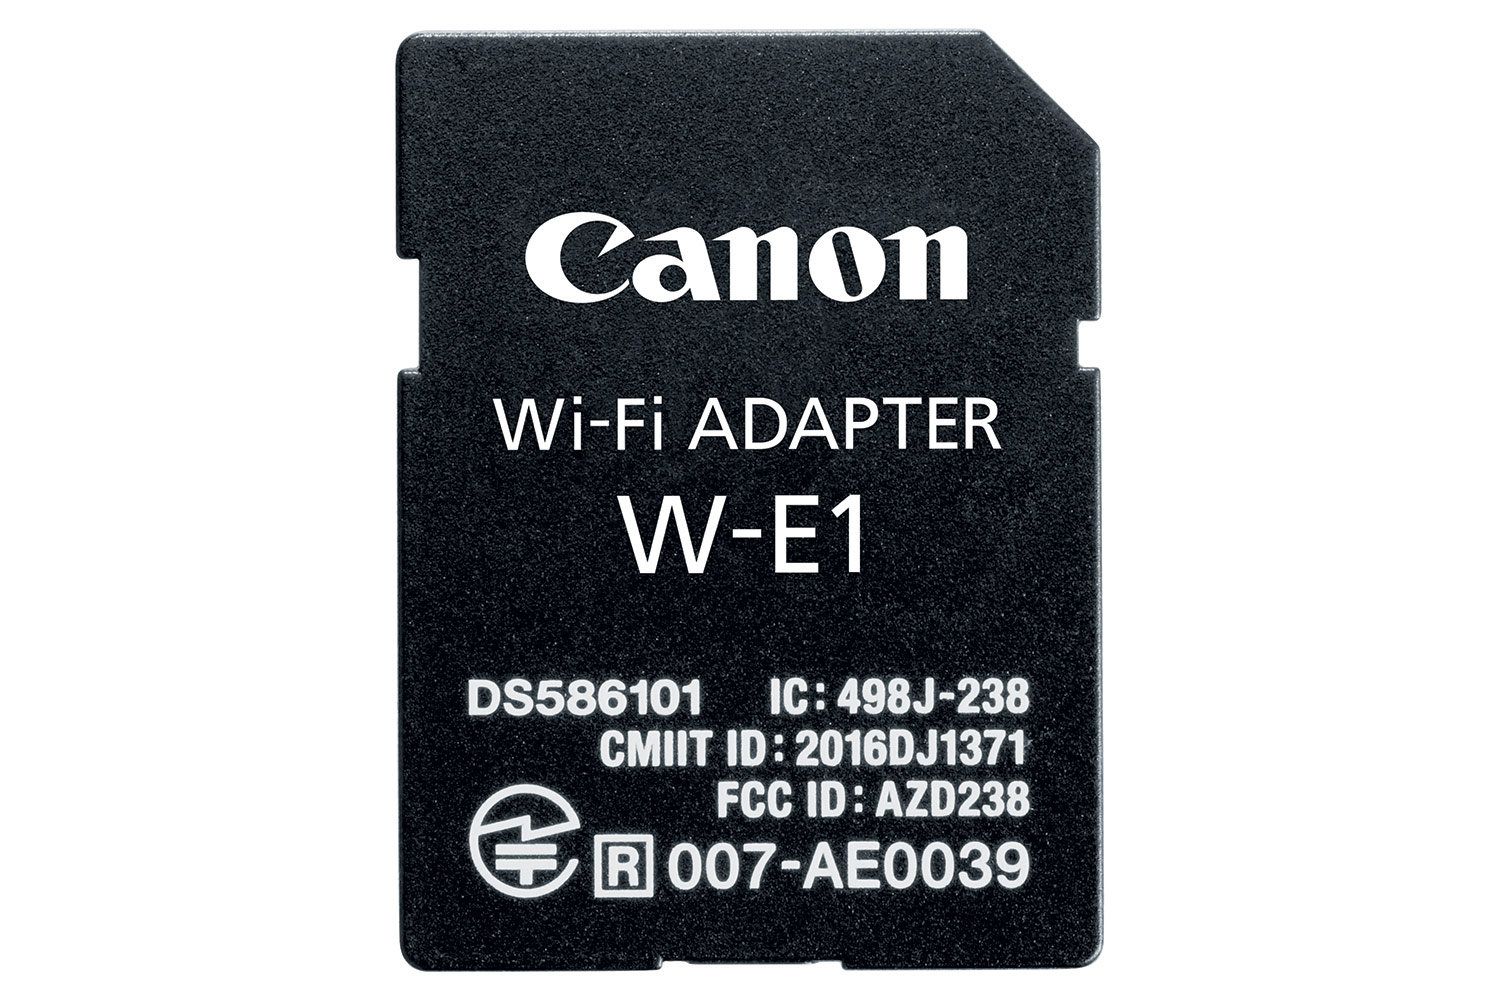 canon 7d mark ii new kits w e1 wifi adapter for